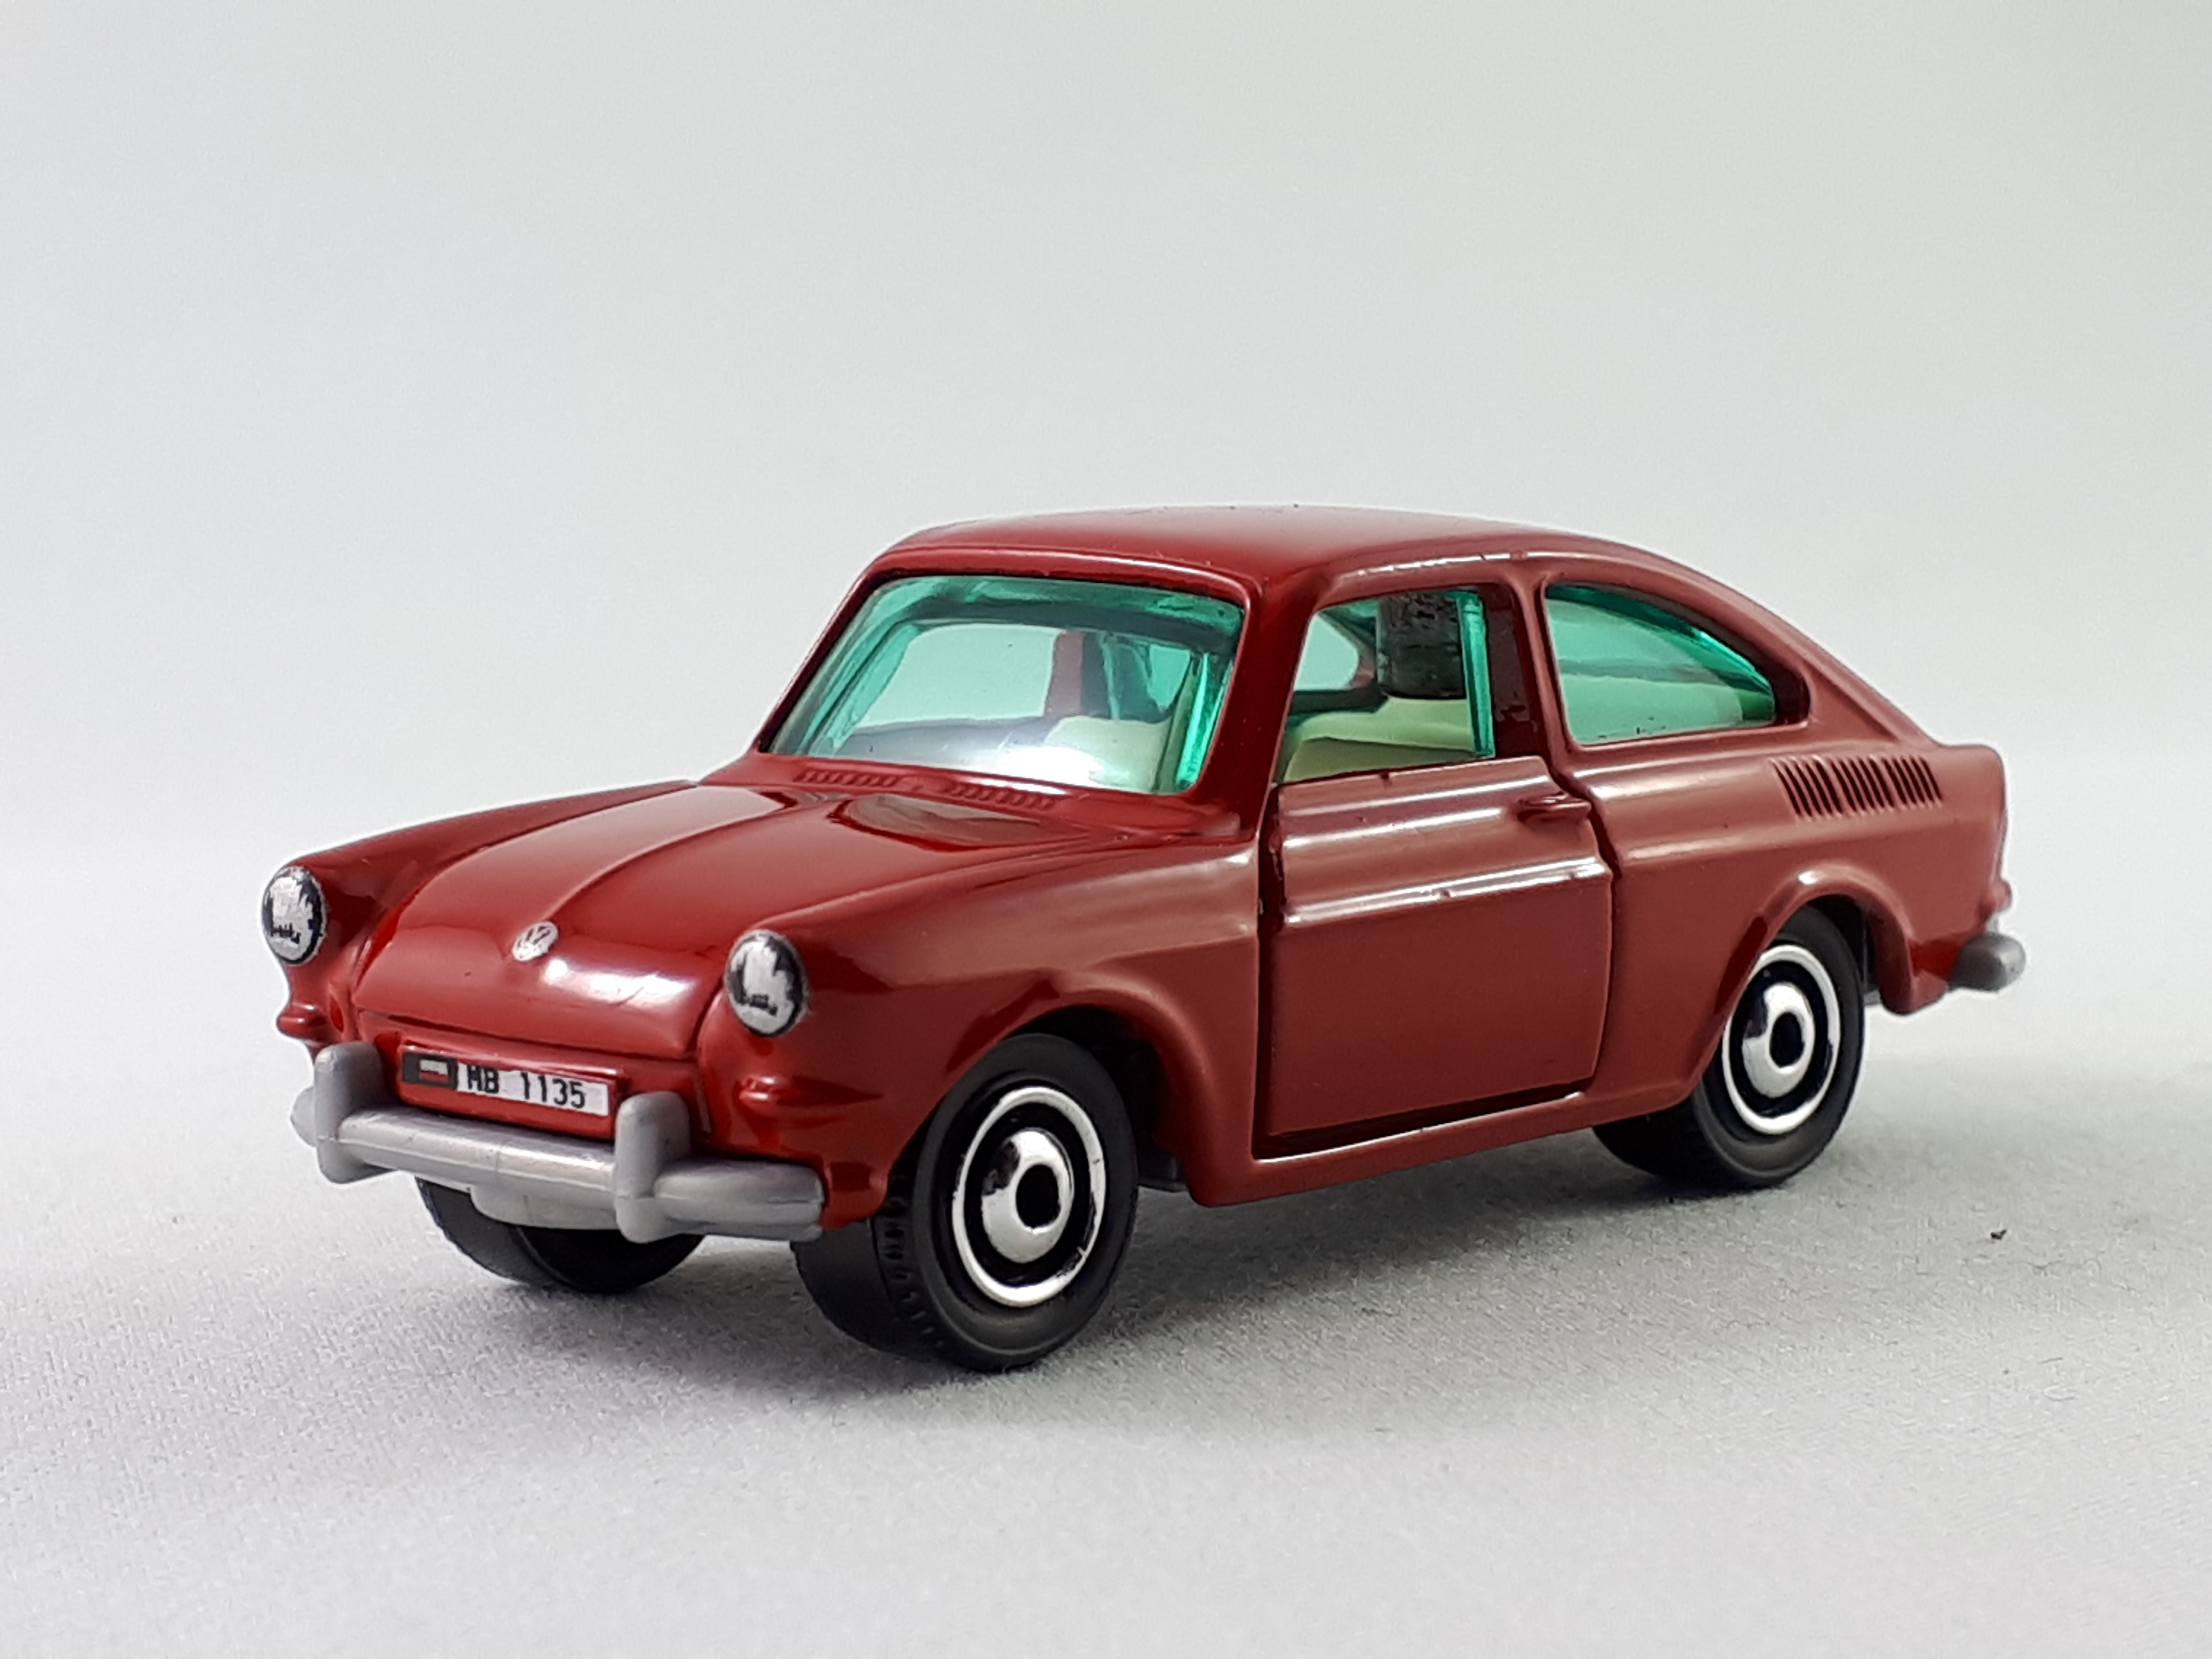 Details about   1965 Volkswagen Type 3 Fastback Matchbox Model Car Diecast Moving Parts